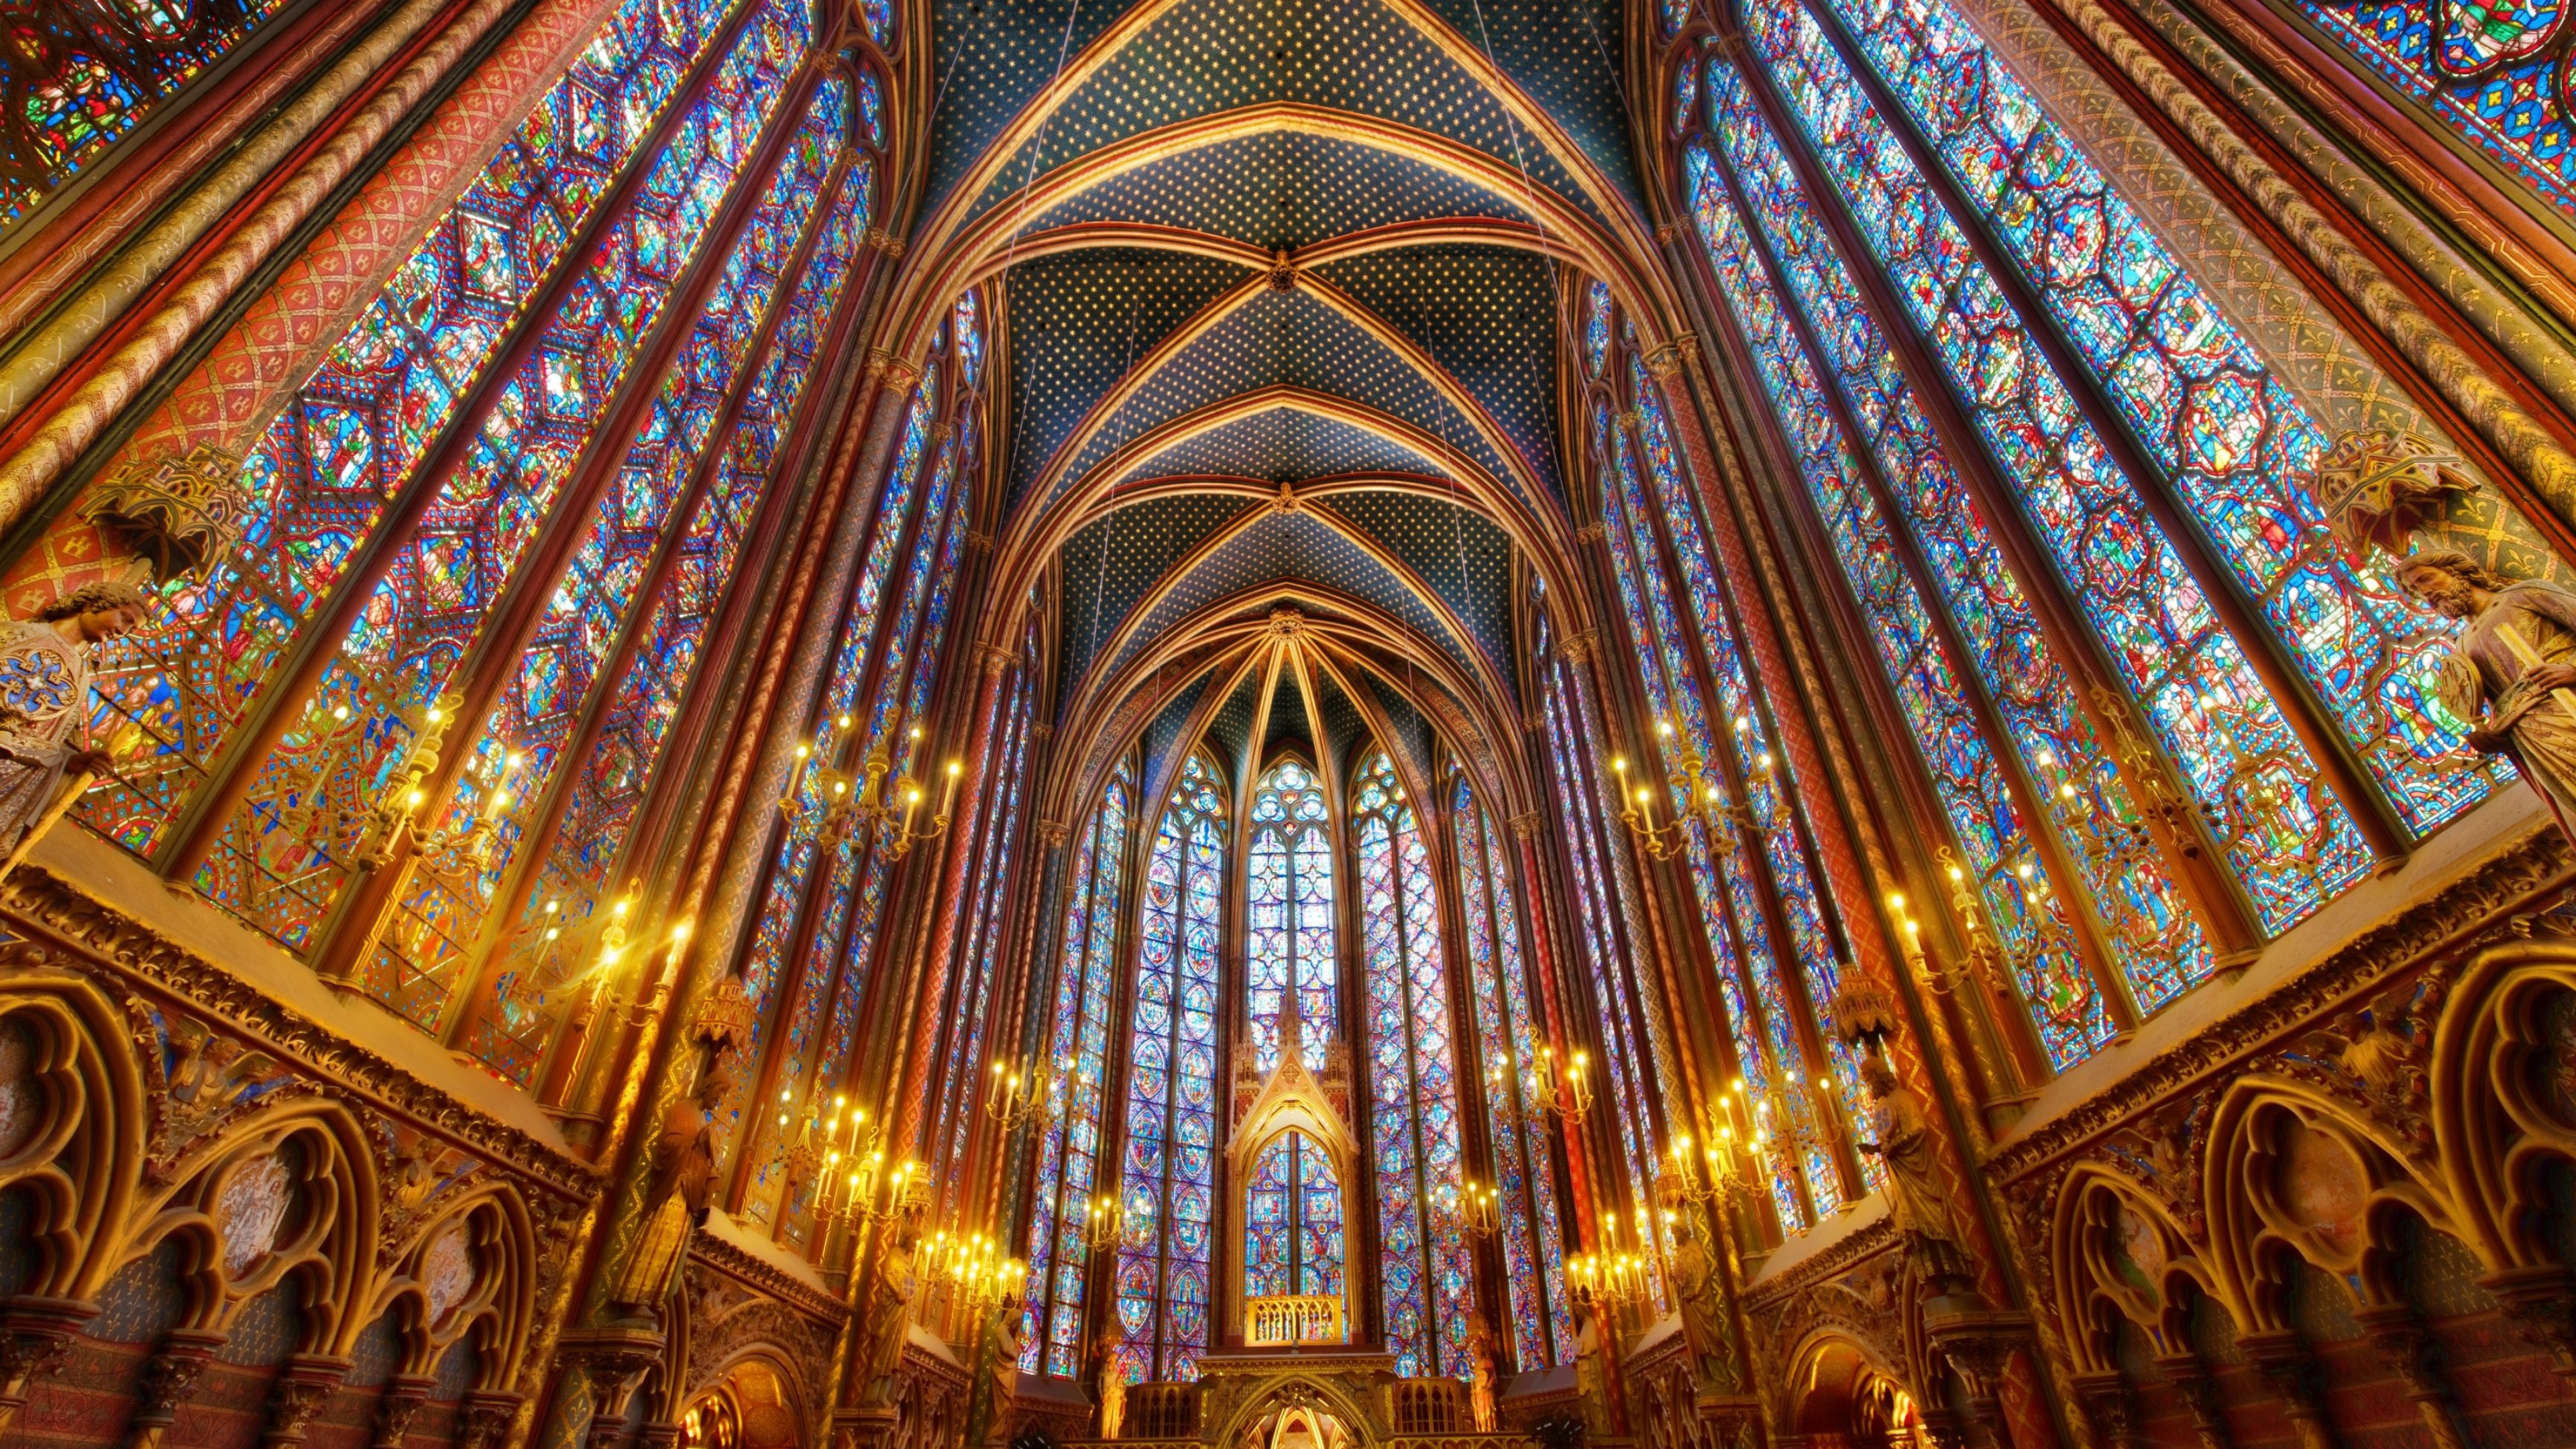 Cathedral 4K wallpapers, High-resolution images, Breathtaking architecture, Magnificent interiors, 3840x2160 4K Desktop